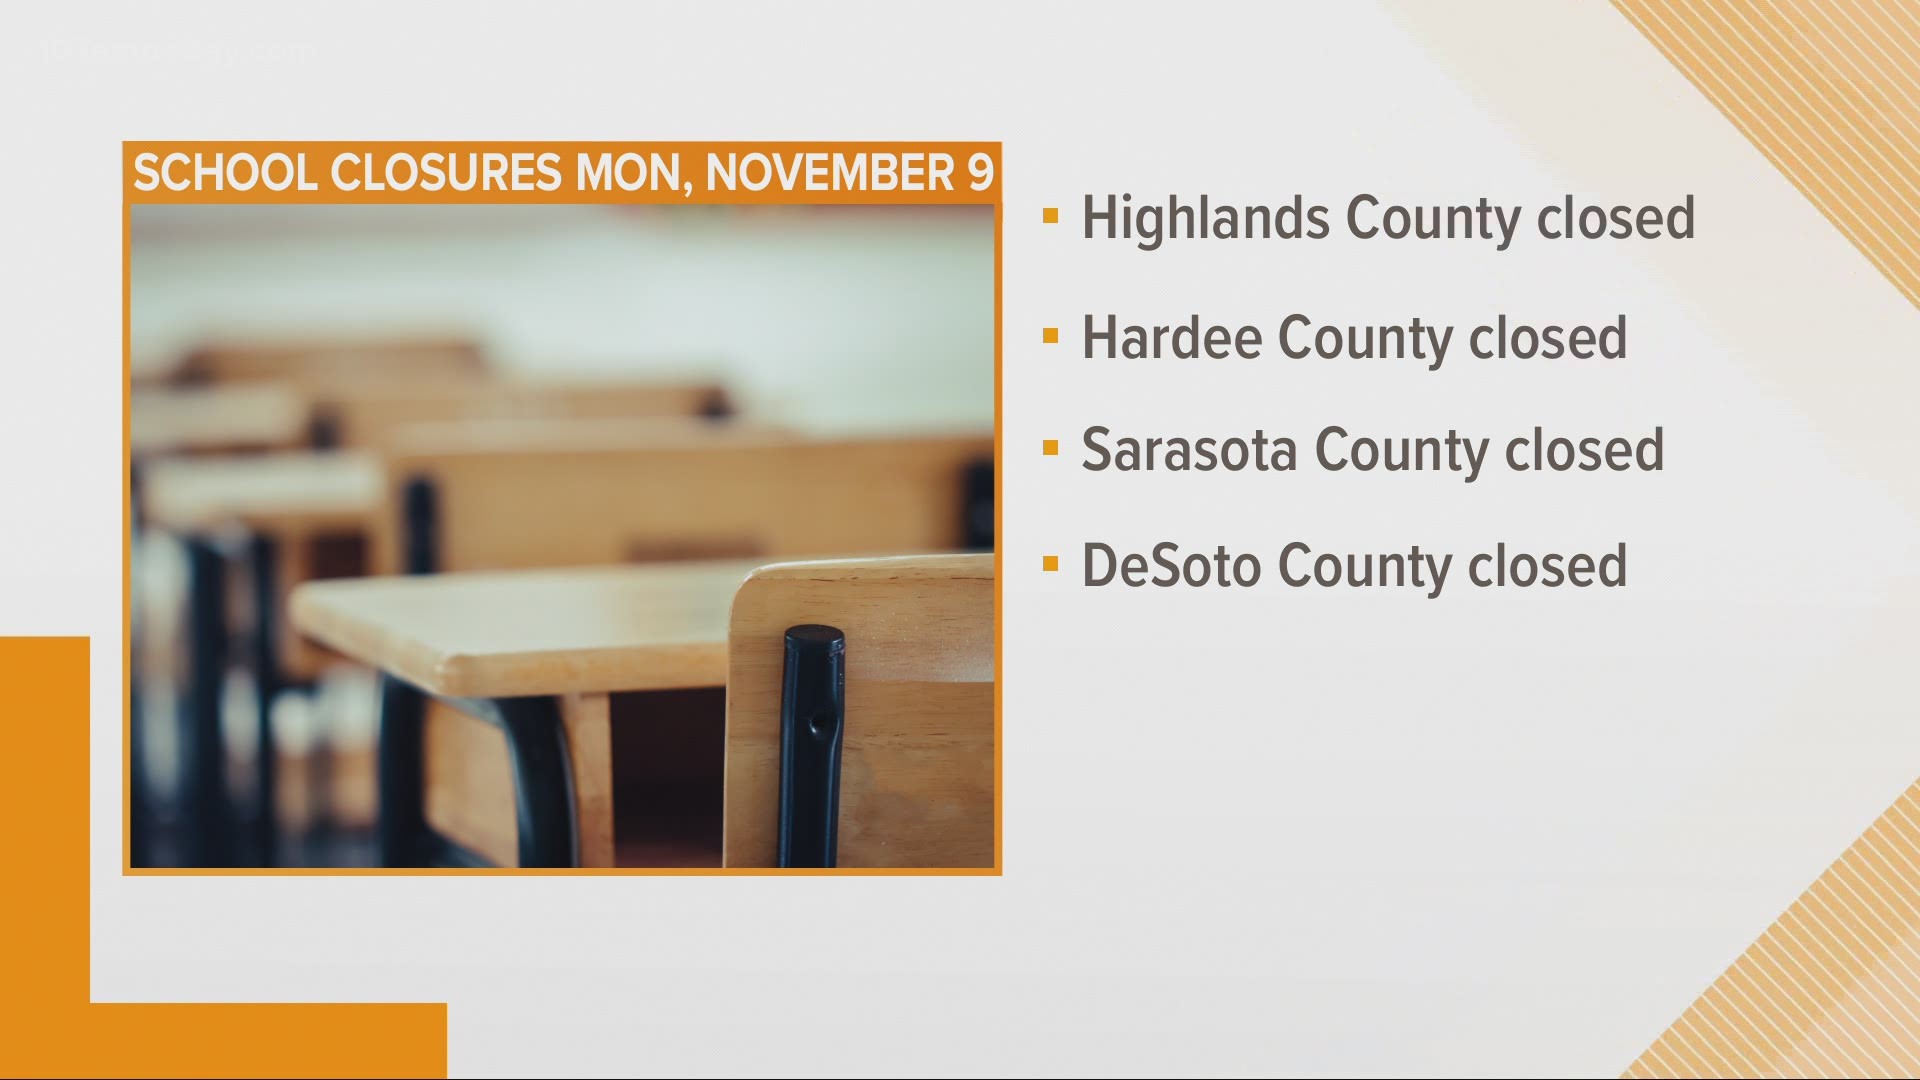 Schools in Sarasota, Highlands, DeSoto and Hardee counties are closed today.